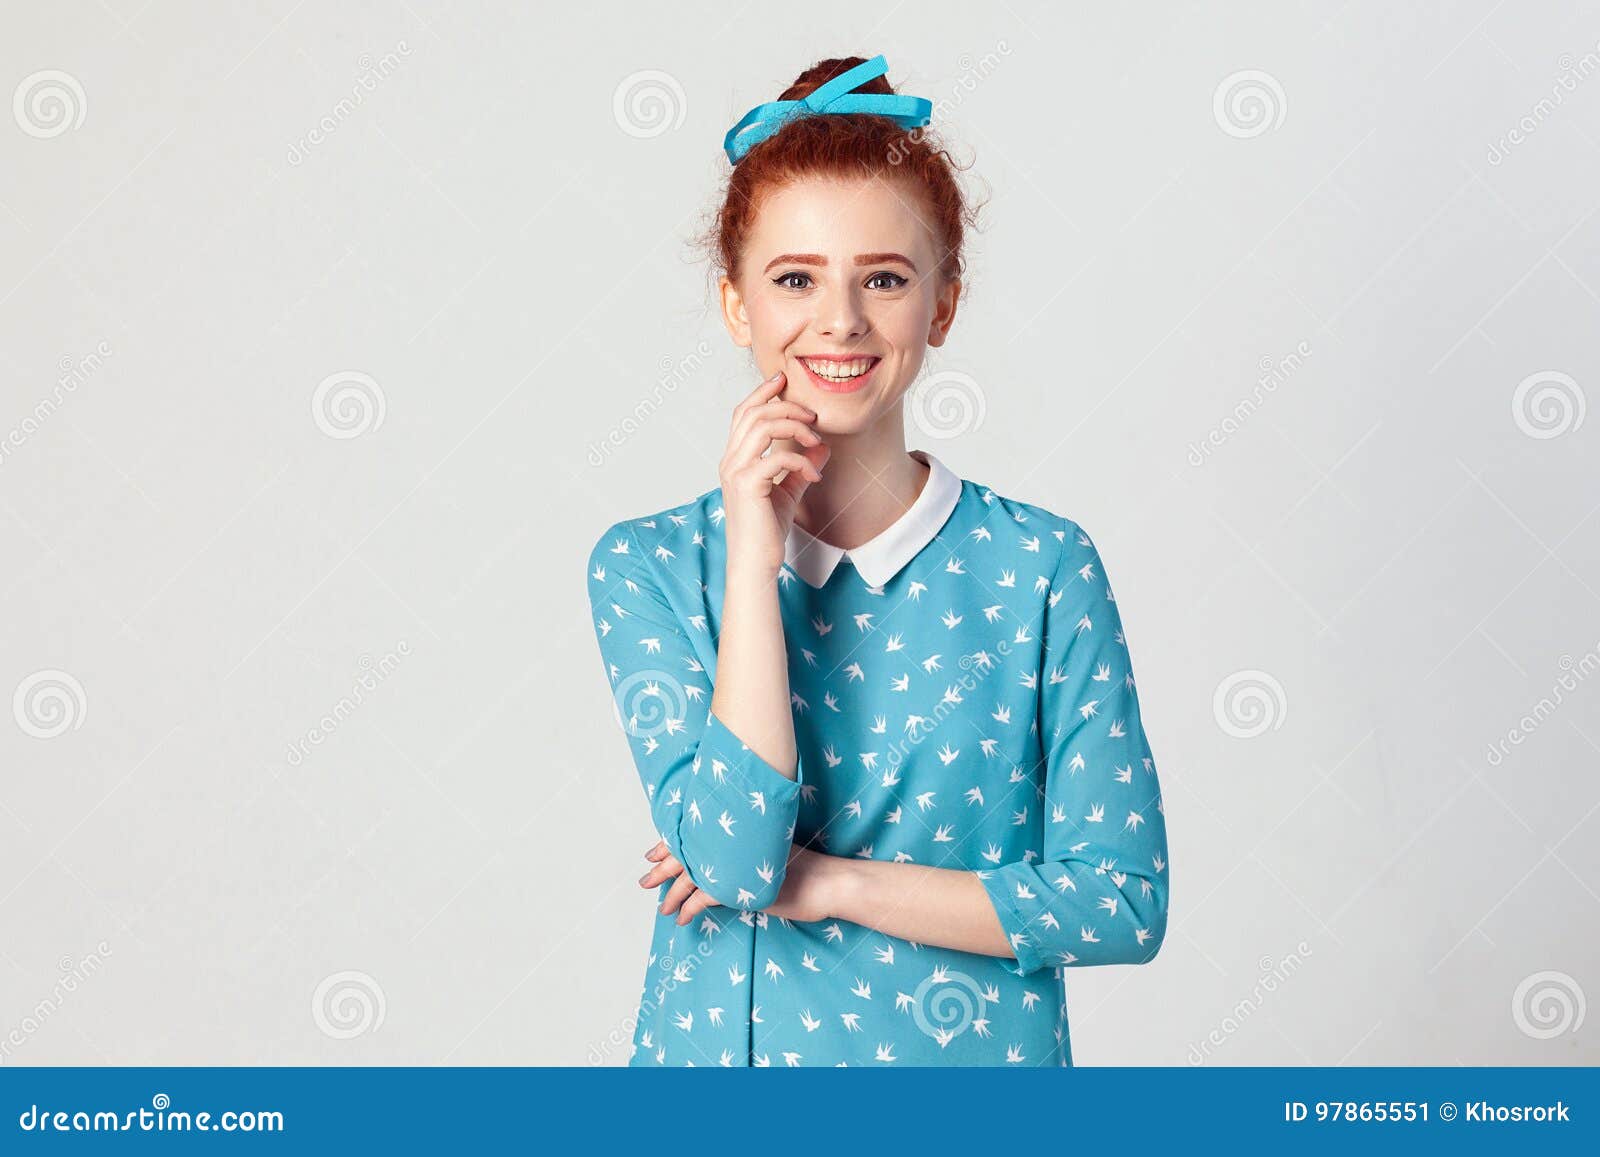 The Attractive Young Redhead Girl with Perfect Clean Skin Looking and ...